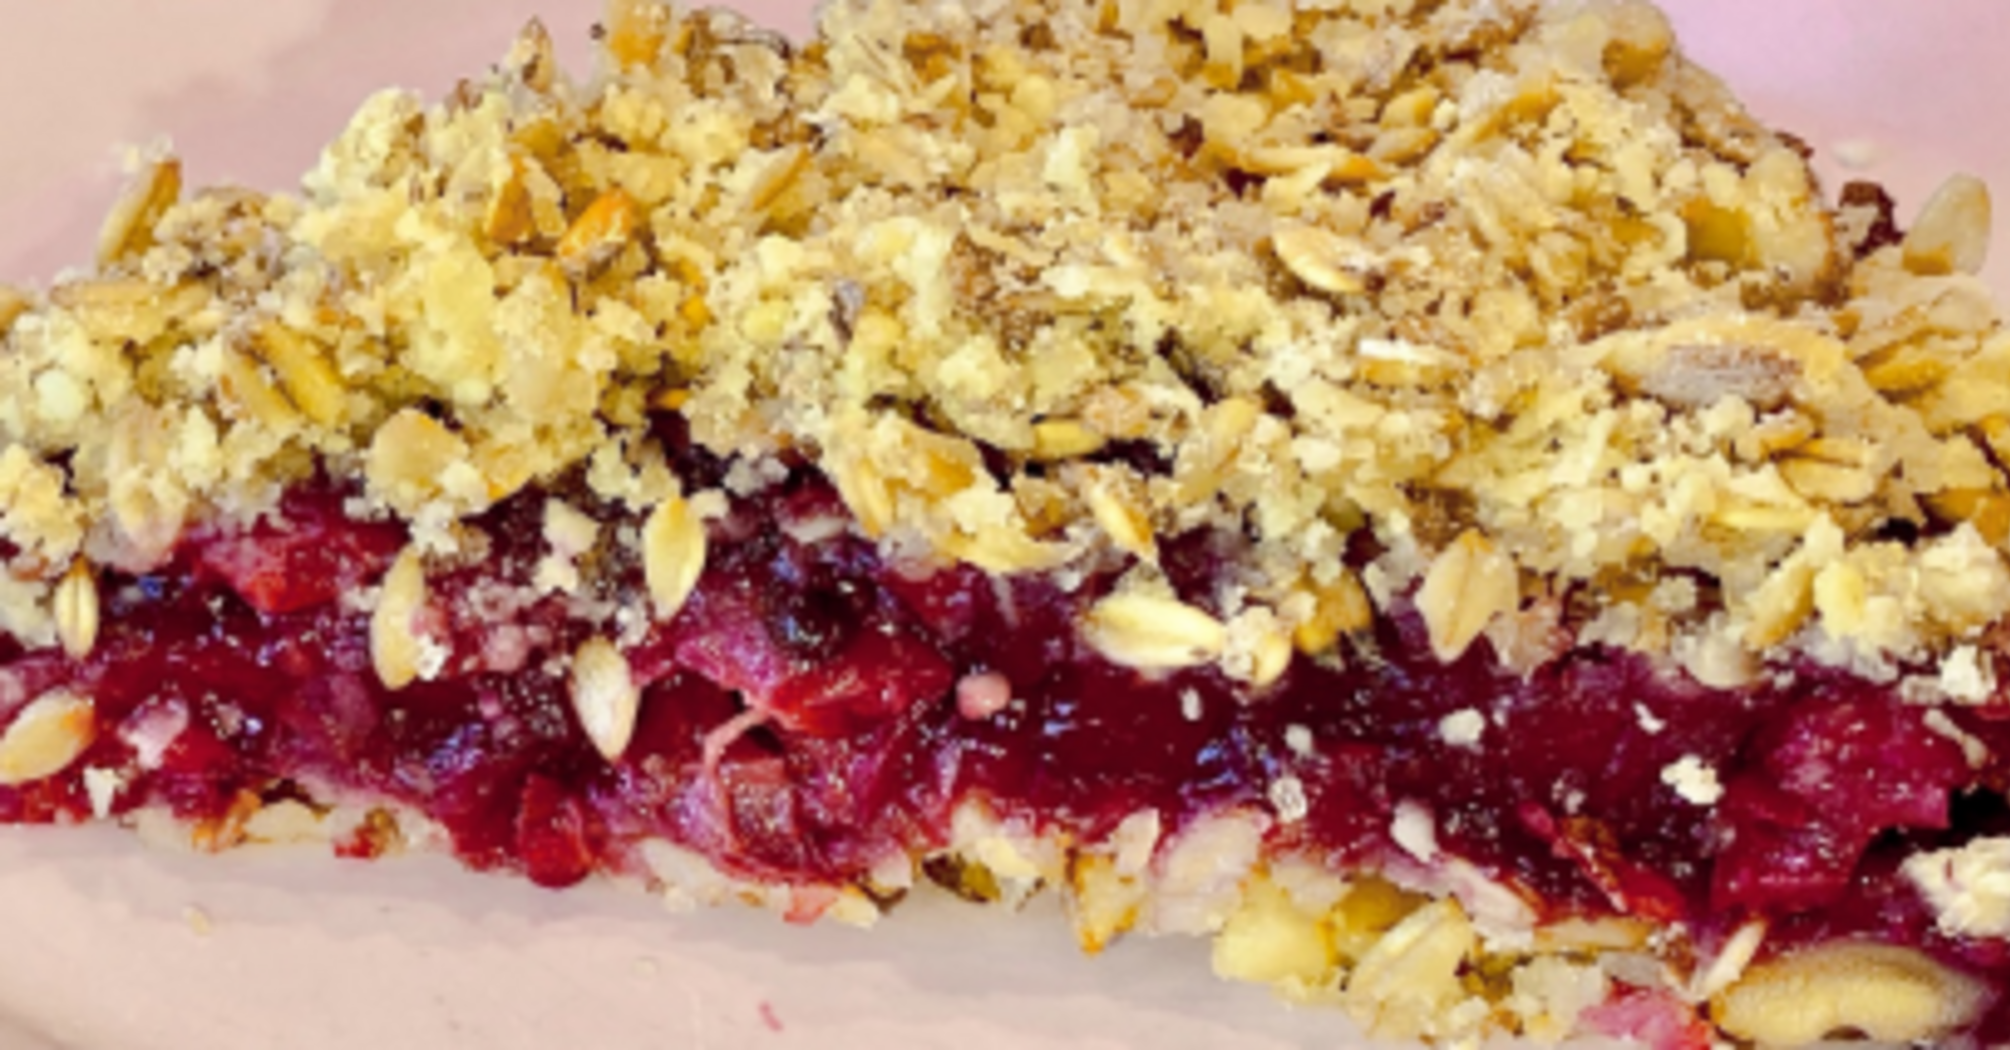 Cherry pie with oatmeal and nuts: how to make a delicious dessert in no time